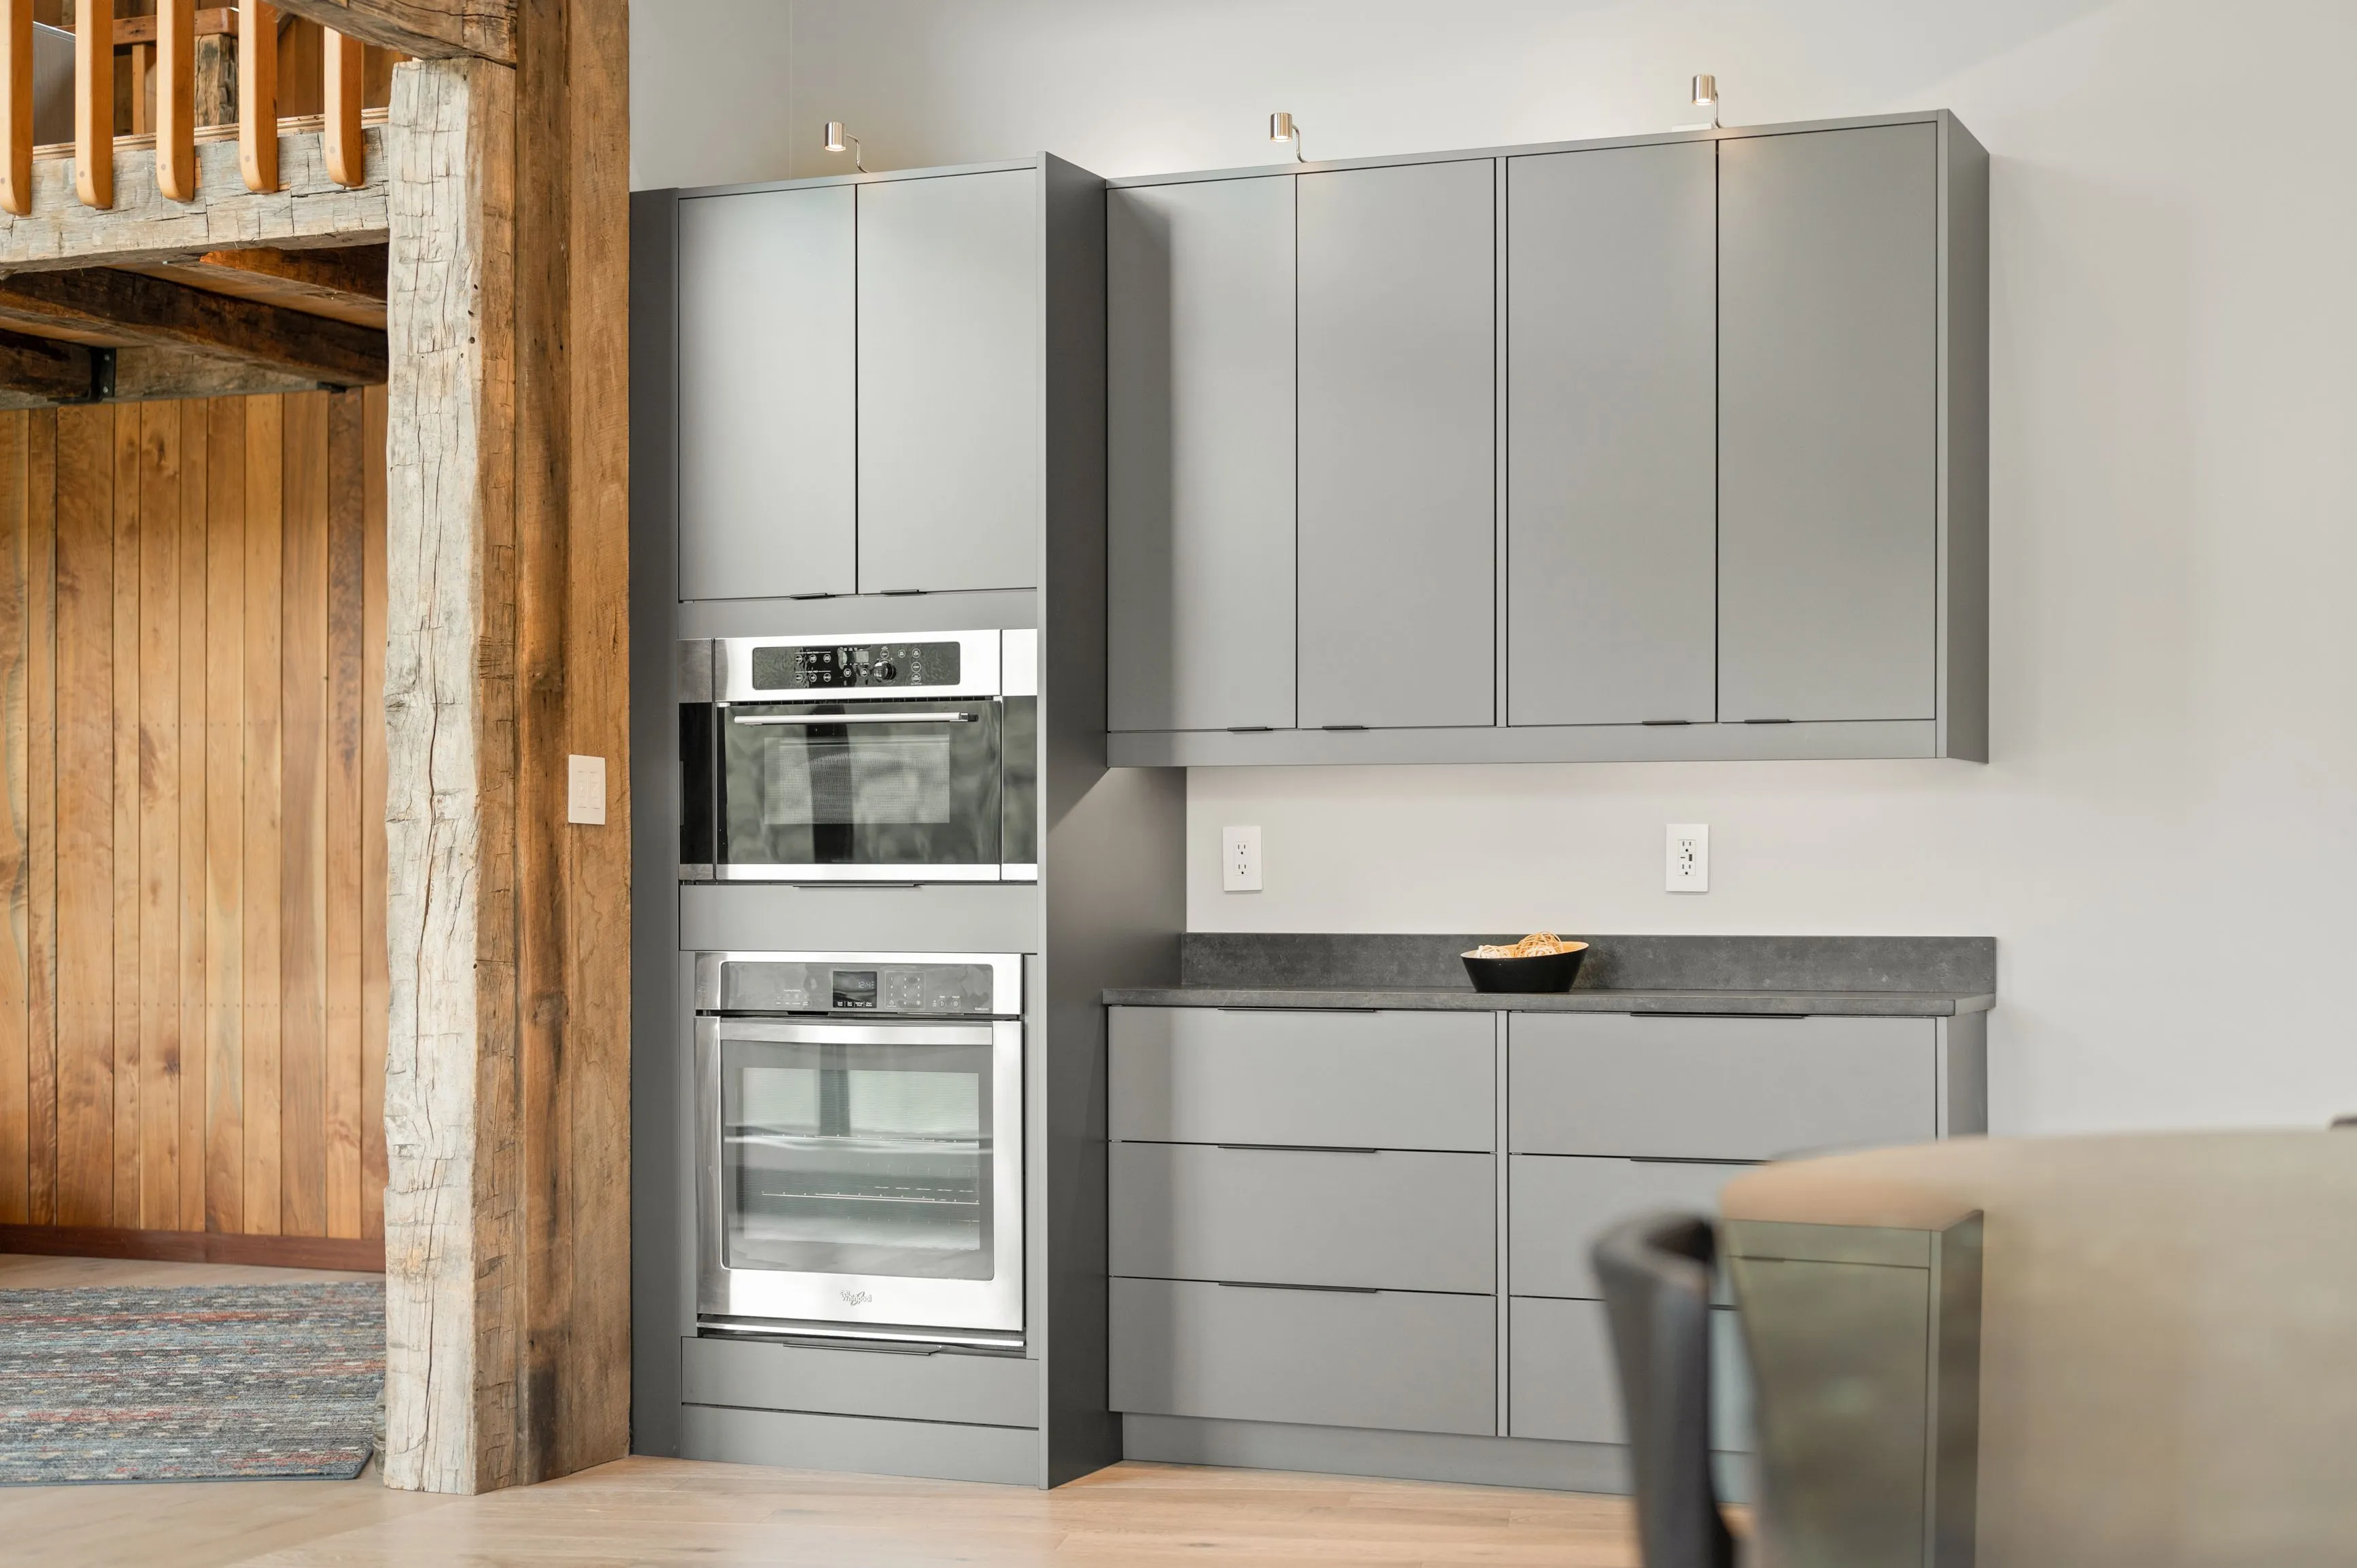 Modern kitchen interior with gray cabinets, built-in stainless steel ovens, and a rustic wooden post on the left.